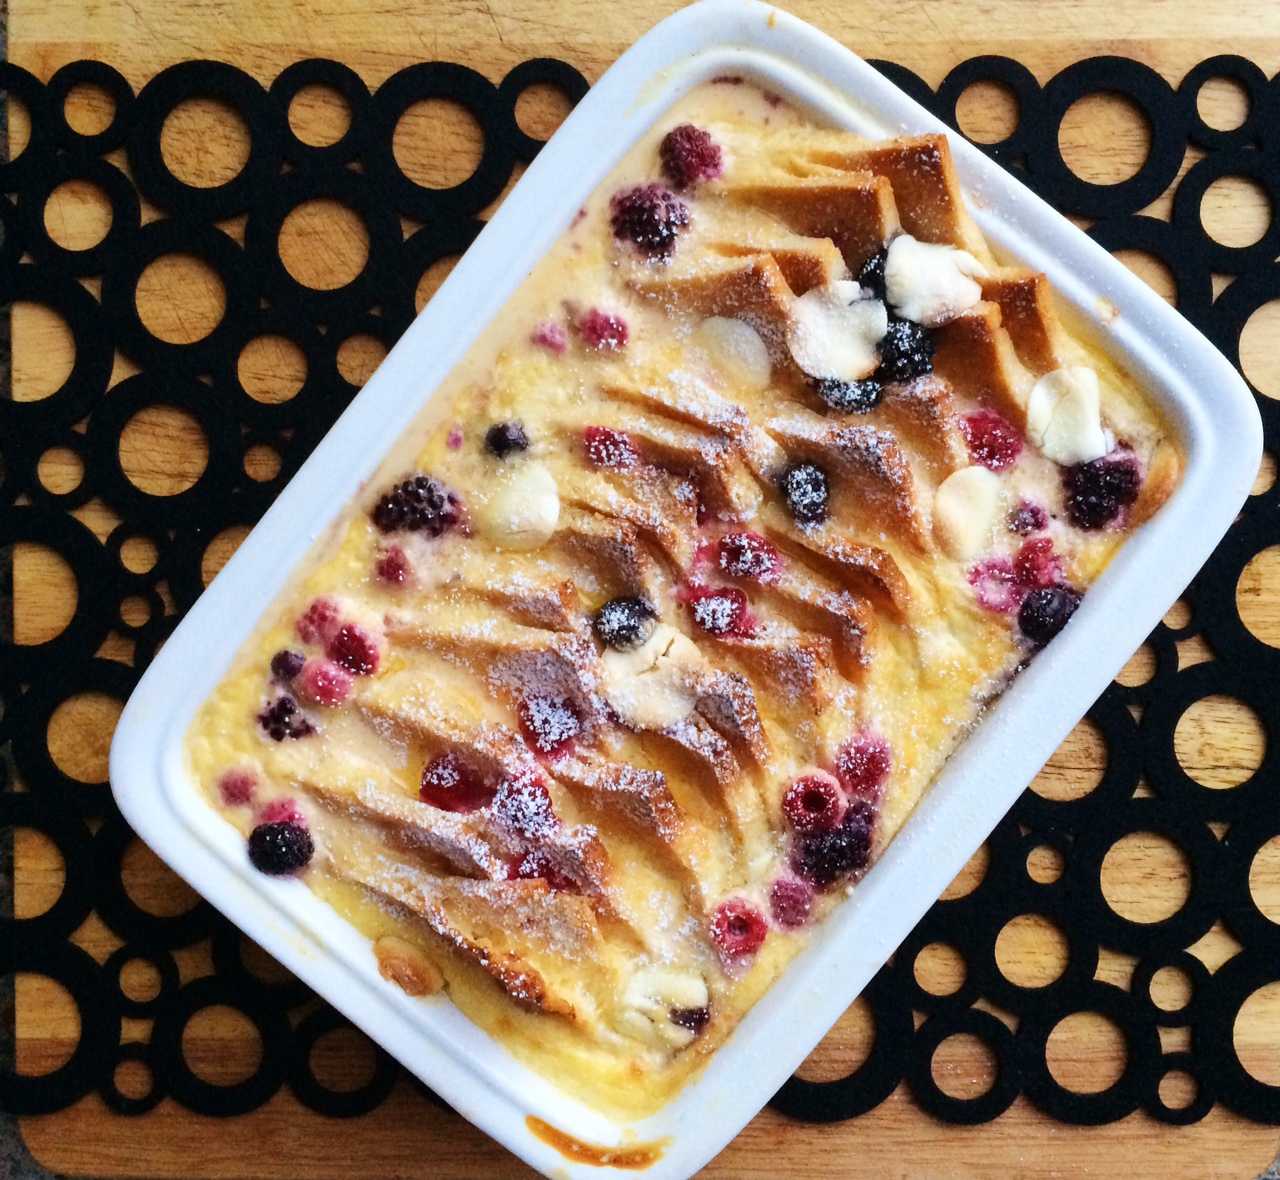 Flat Bread Bread and Butter Pudding